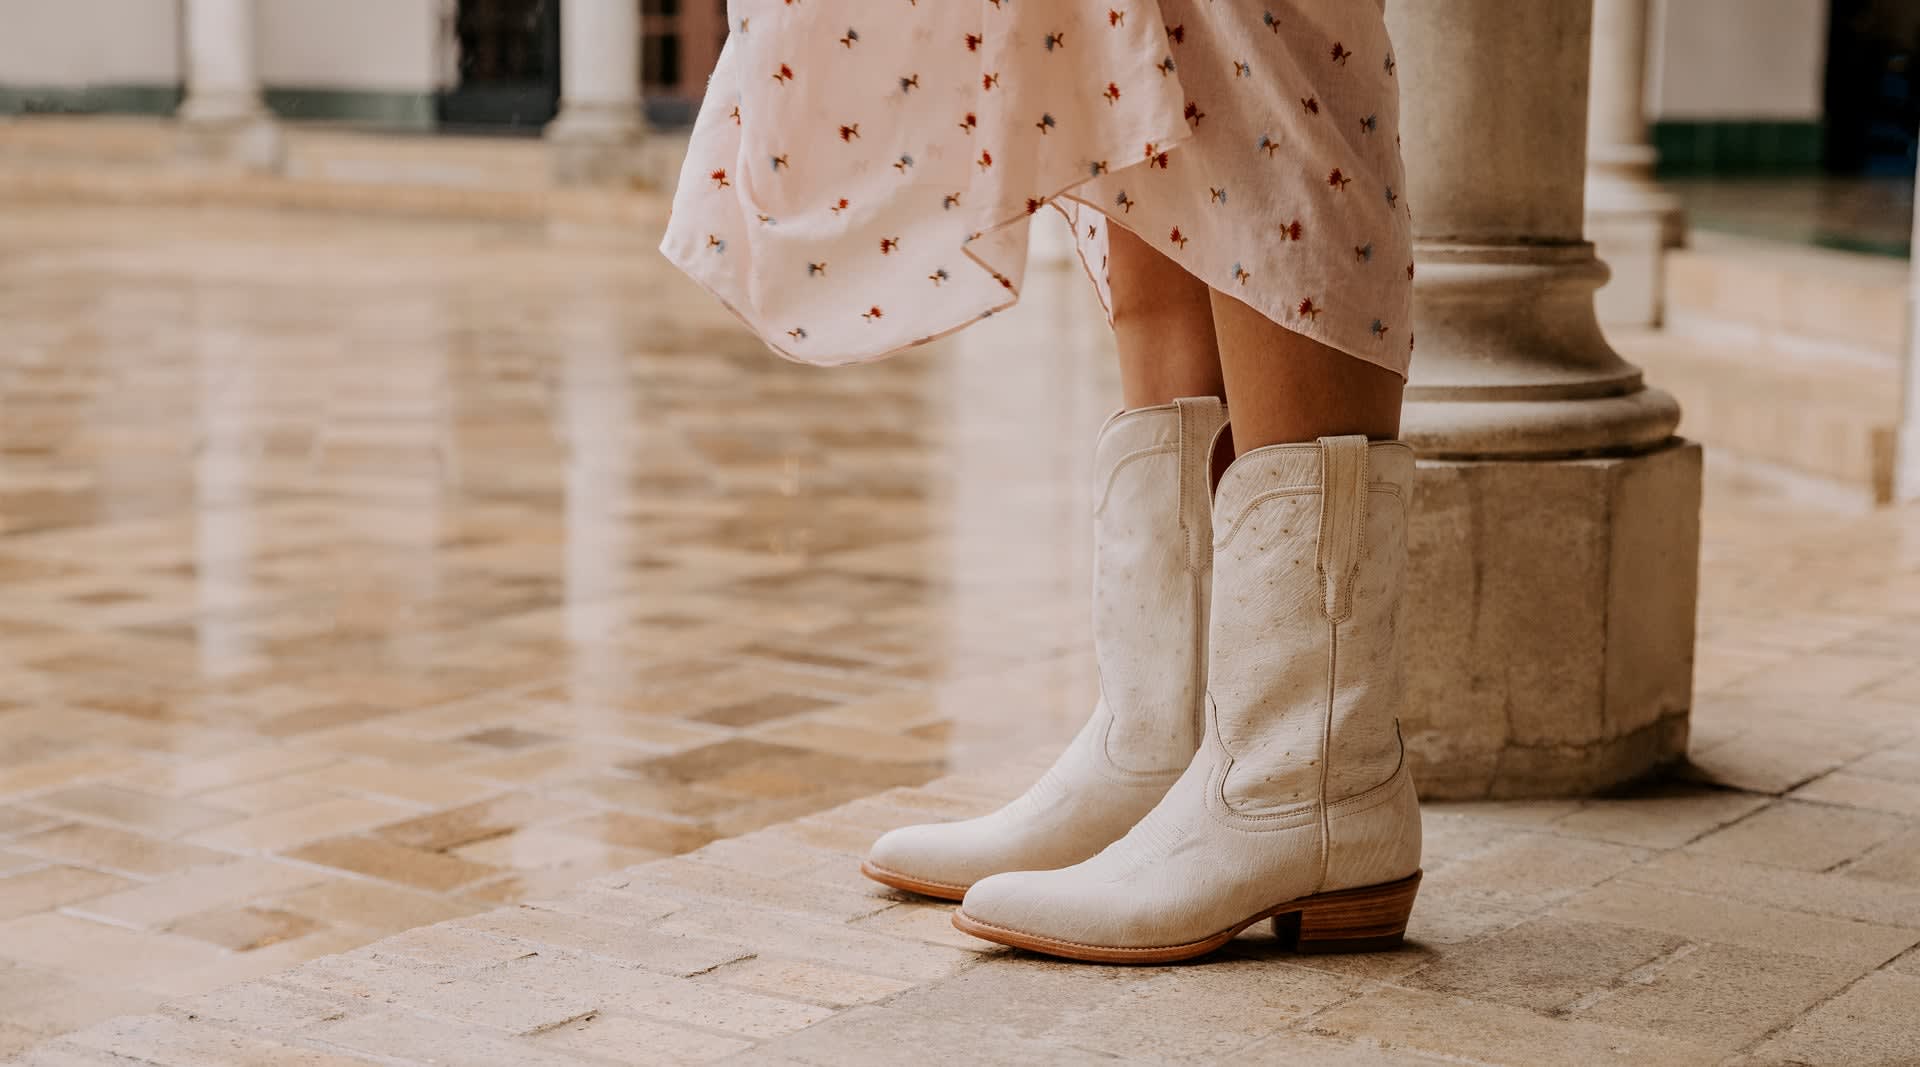 The Chloe Ostrich Boot